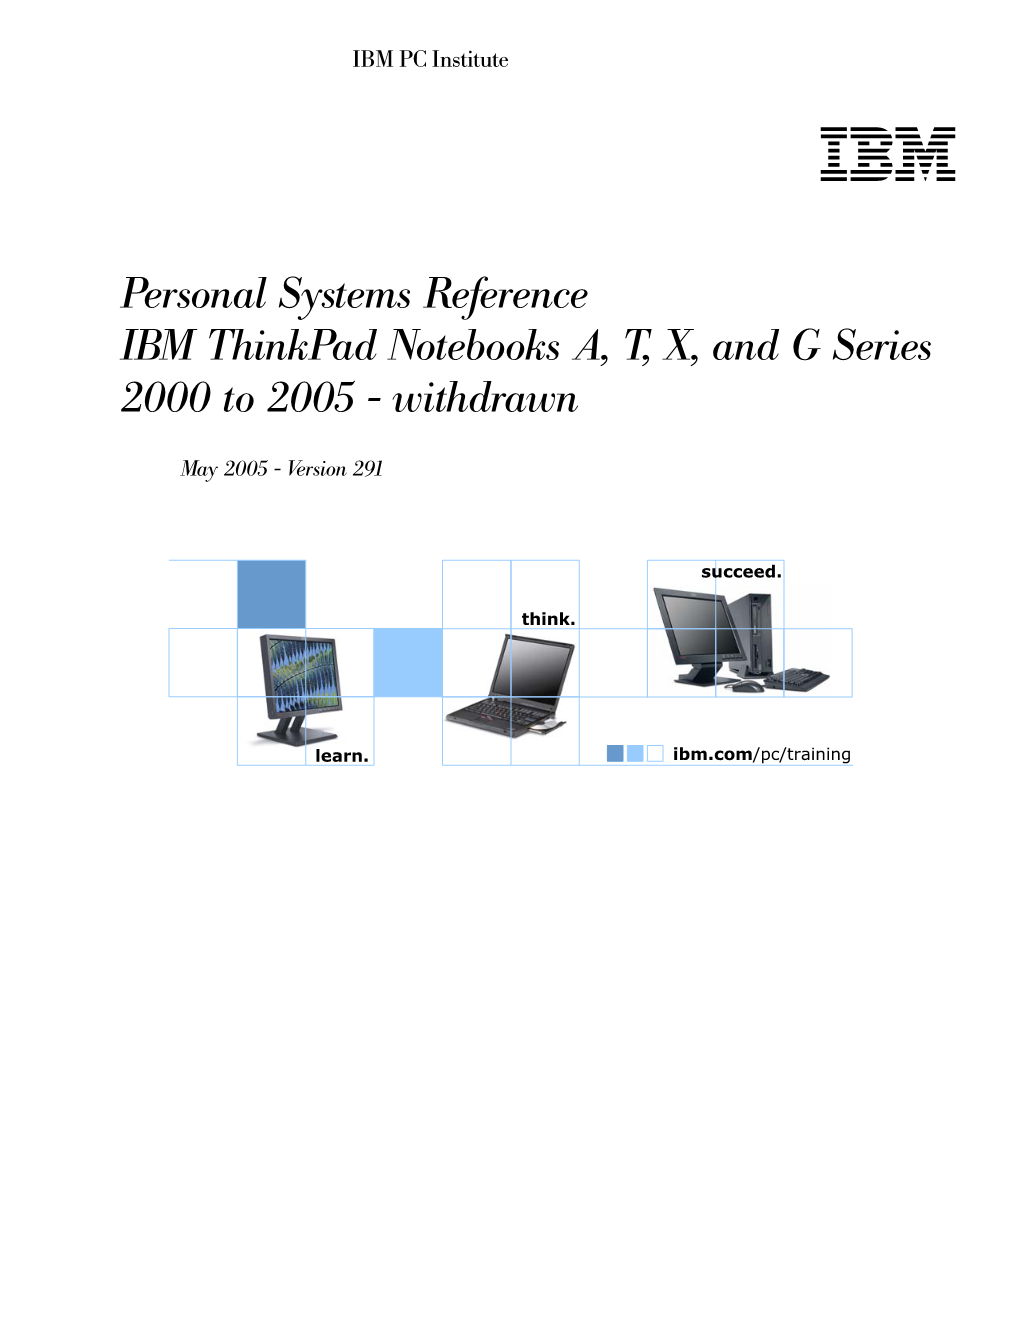 Personal Systems Reference IBM Thinkpad Notebooks A, T, X, and G Series 2000 to 2005 - Withdrawn